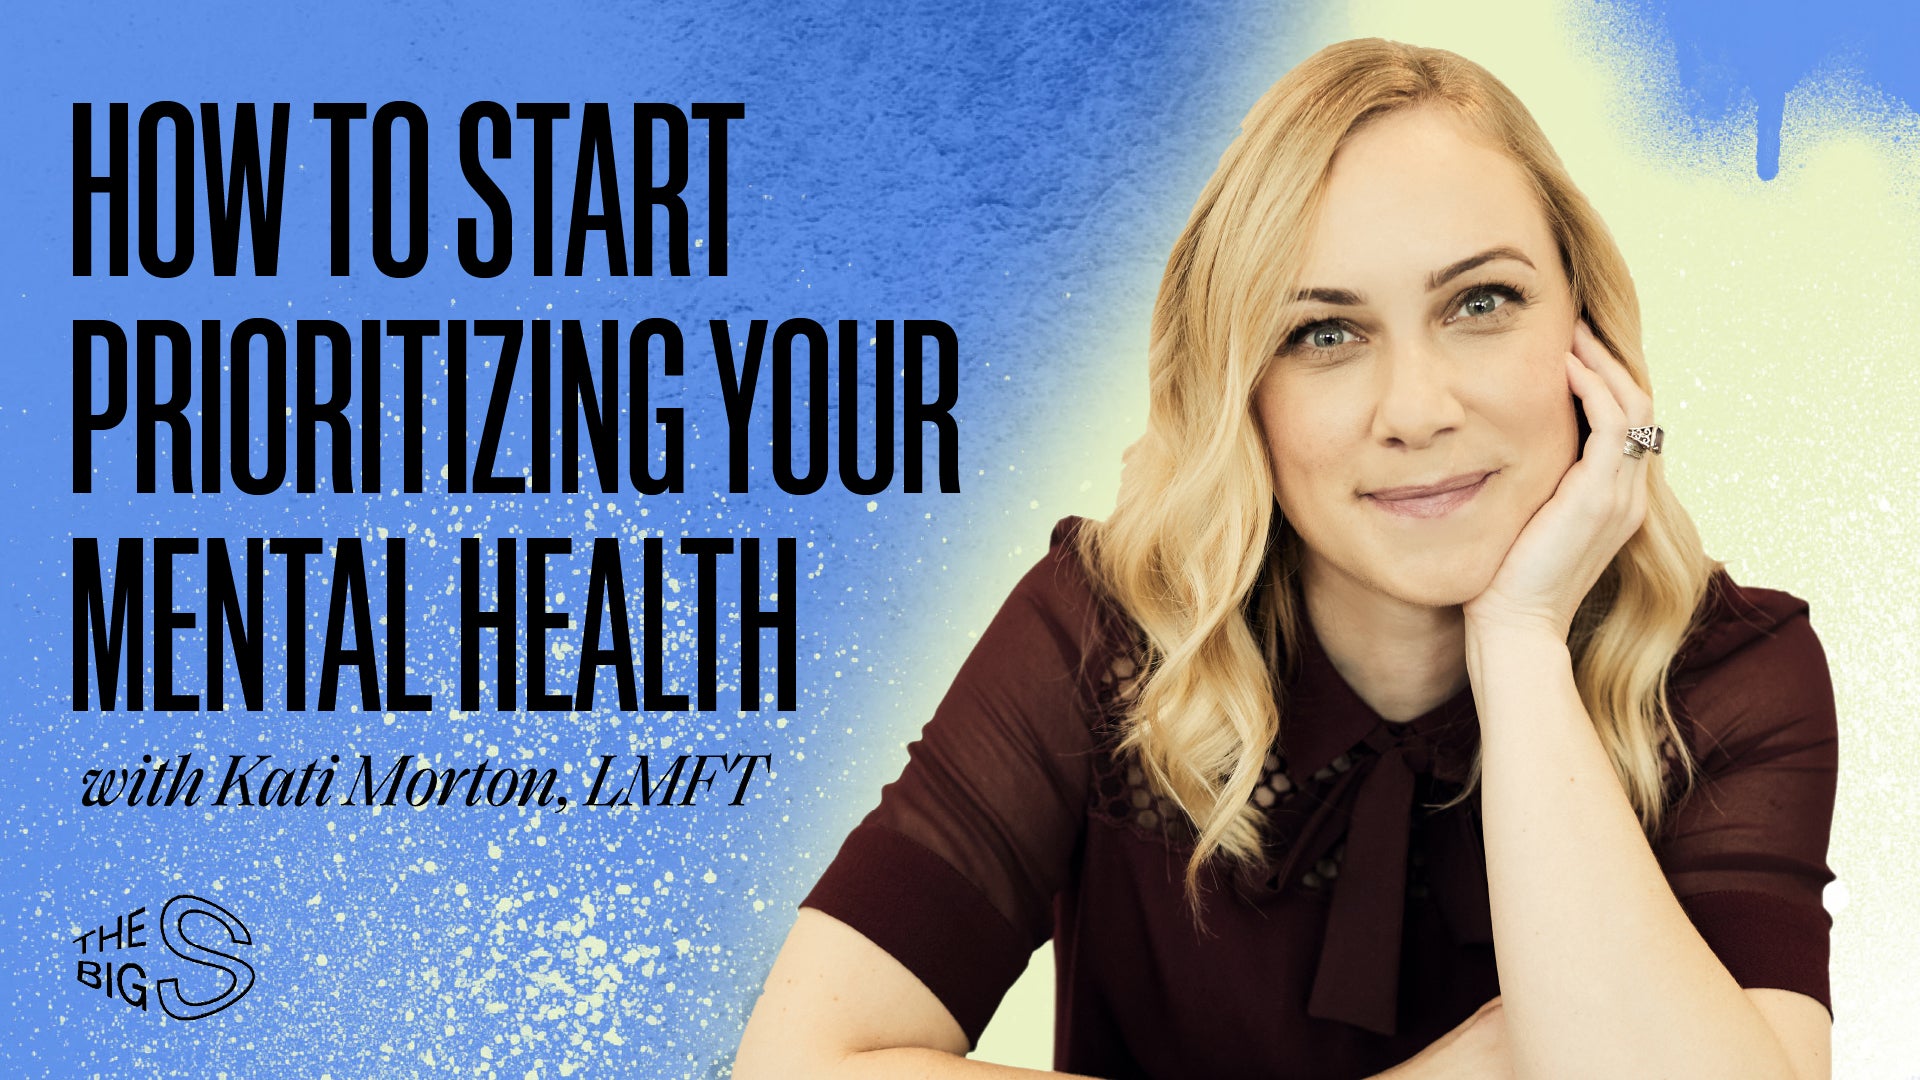 51. How to Start Prioritizing Your Mental Health with Kati Morton, LMFT